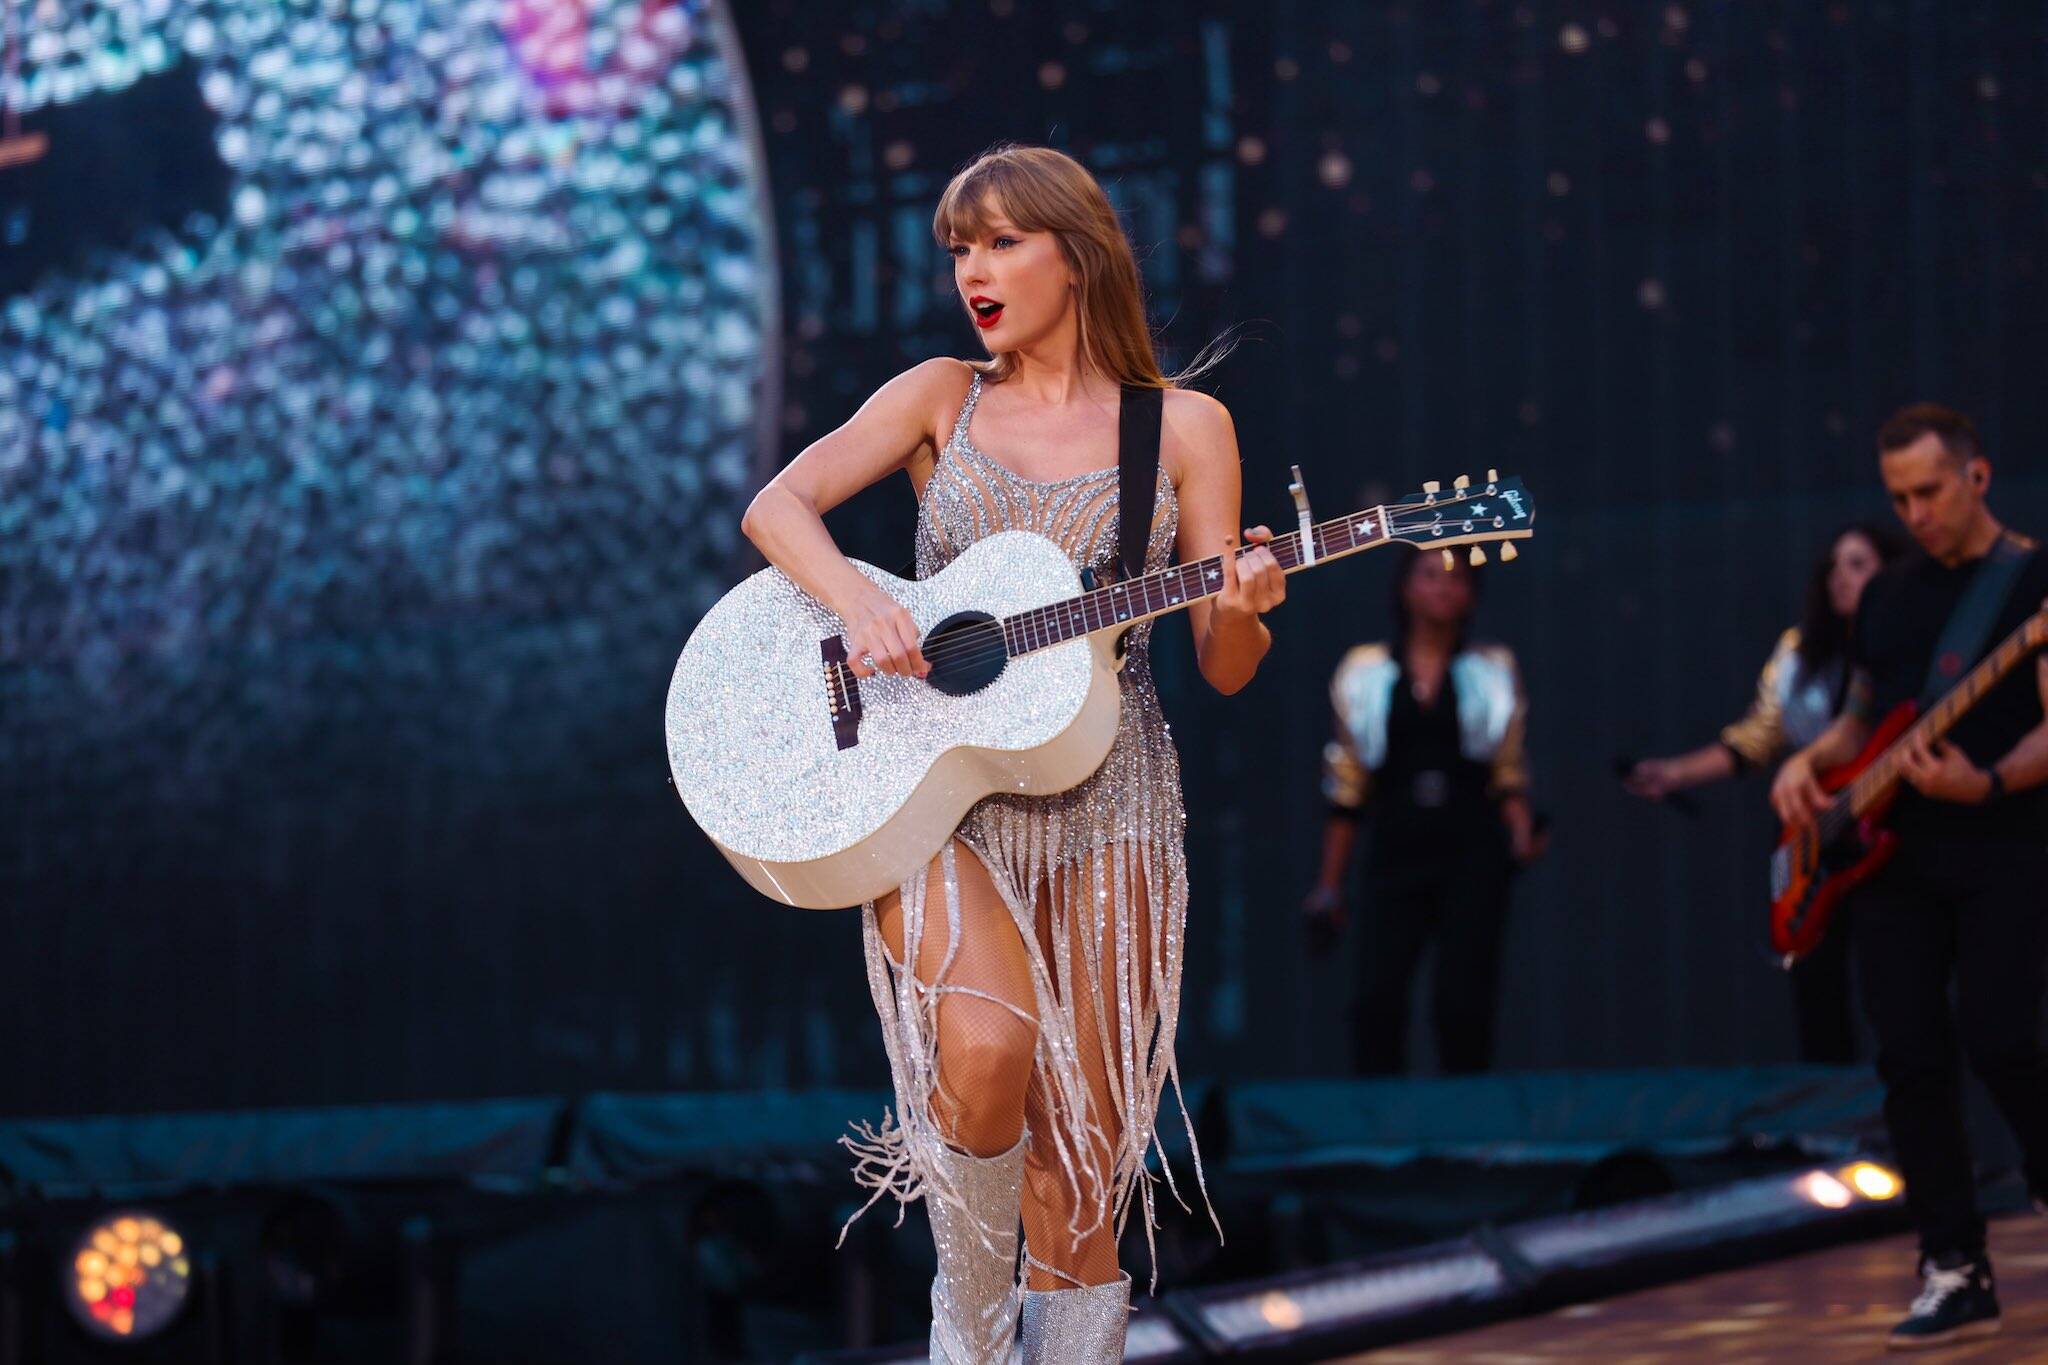 Taylor Swift leaves Canada out of international tour dates and fans are